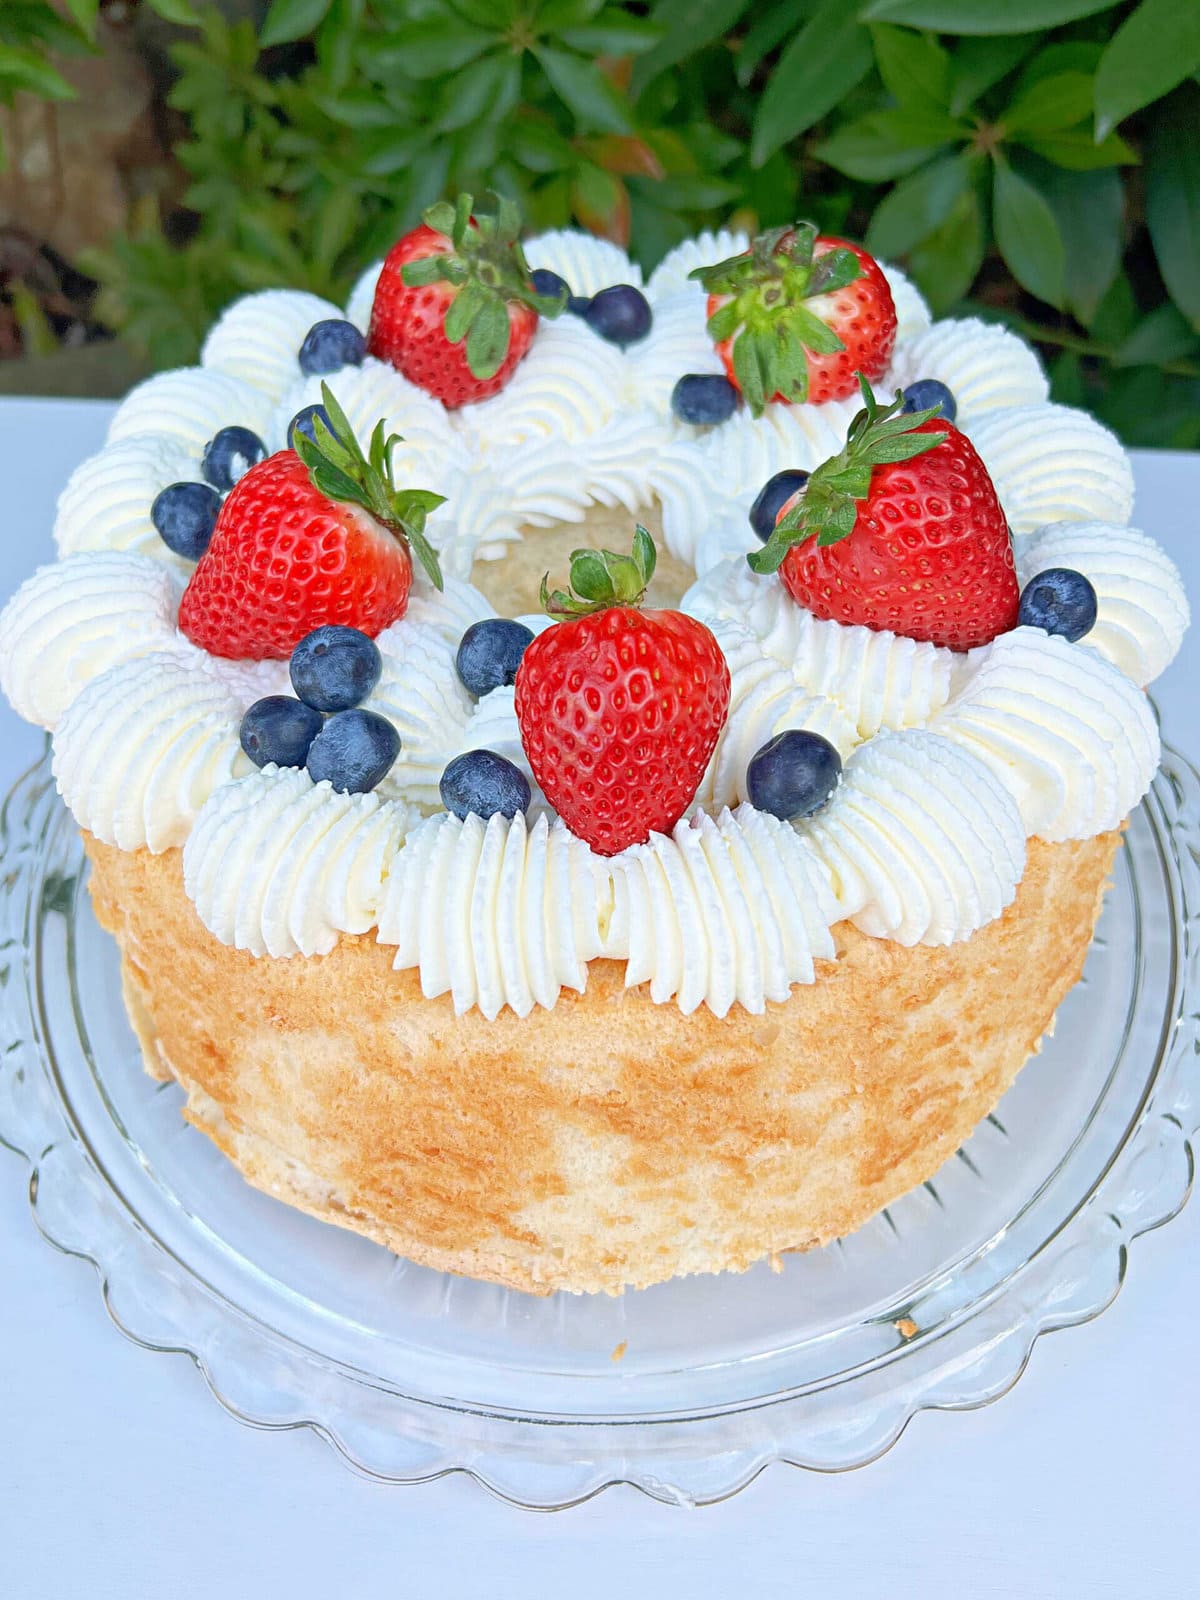 Angel Food Cake on a cake pedestal with whipped cream, strawberries, and blueberries.